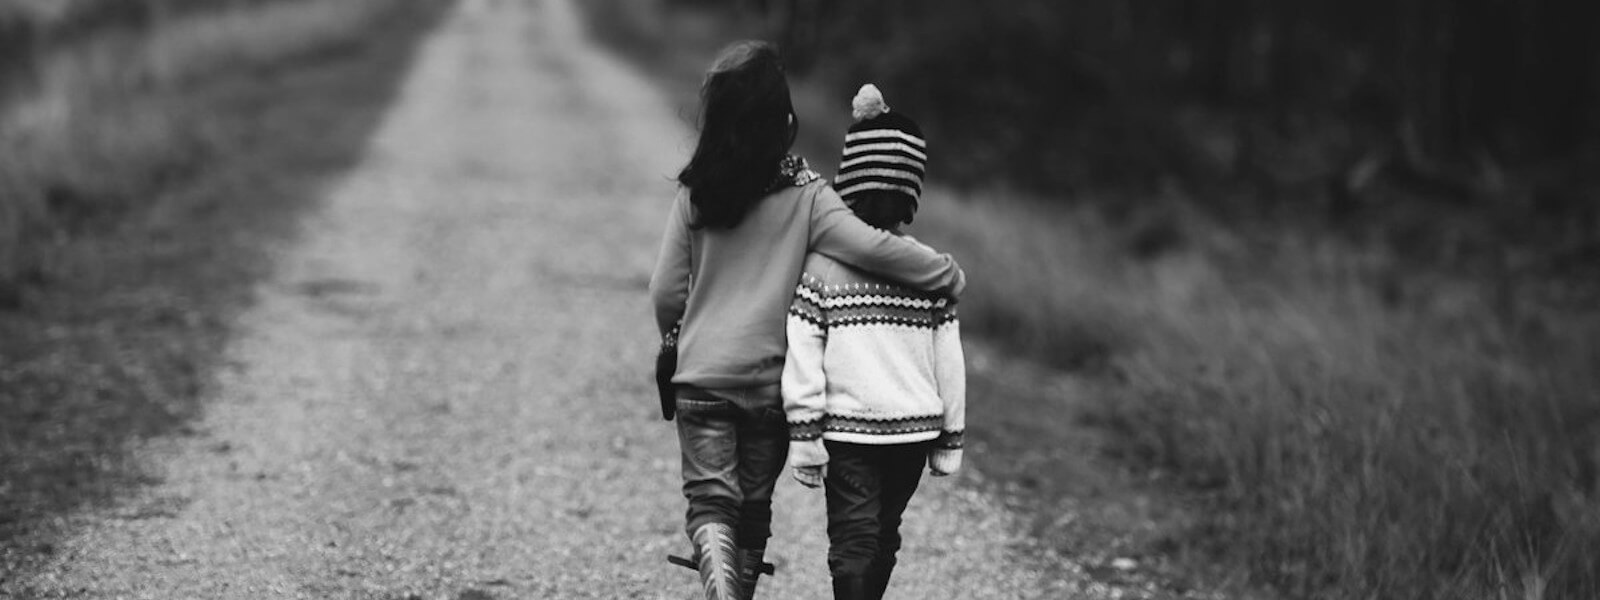 A boy and a girl walk arm in arm together on a dirtroad.